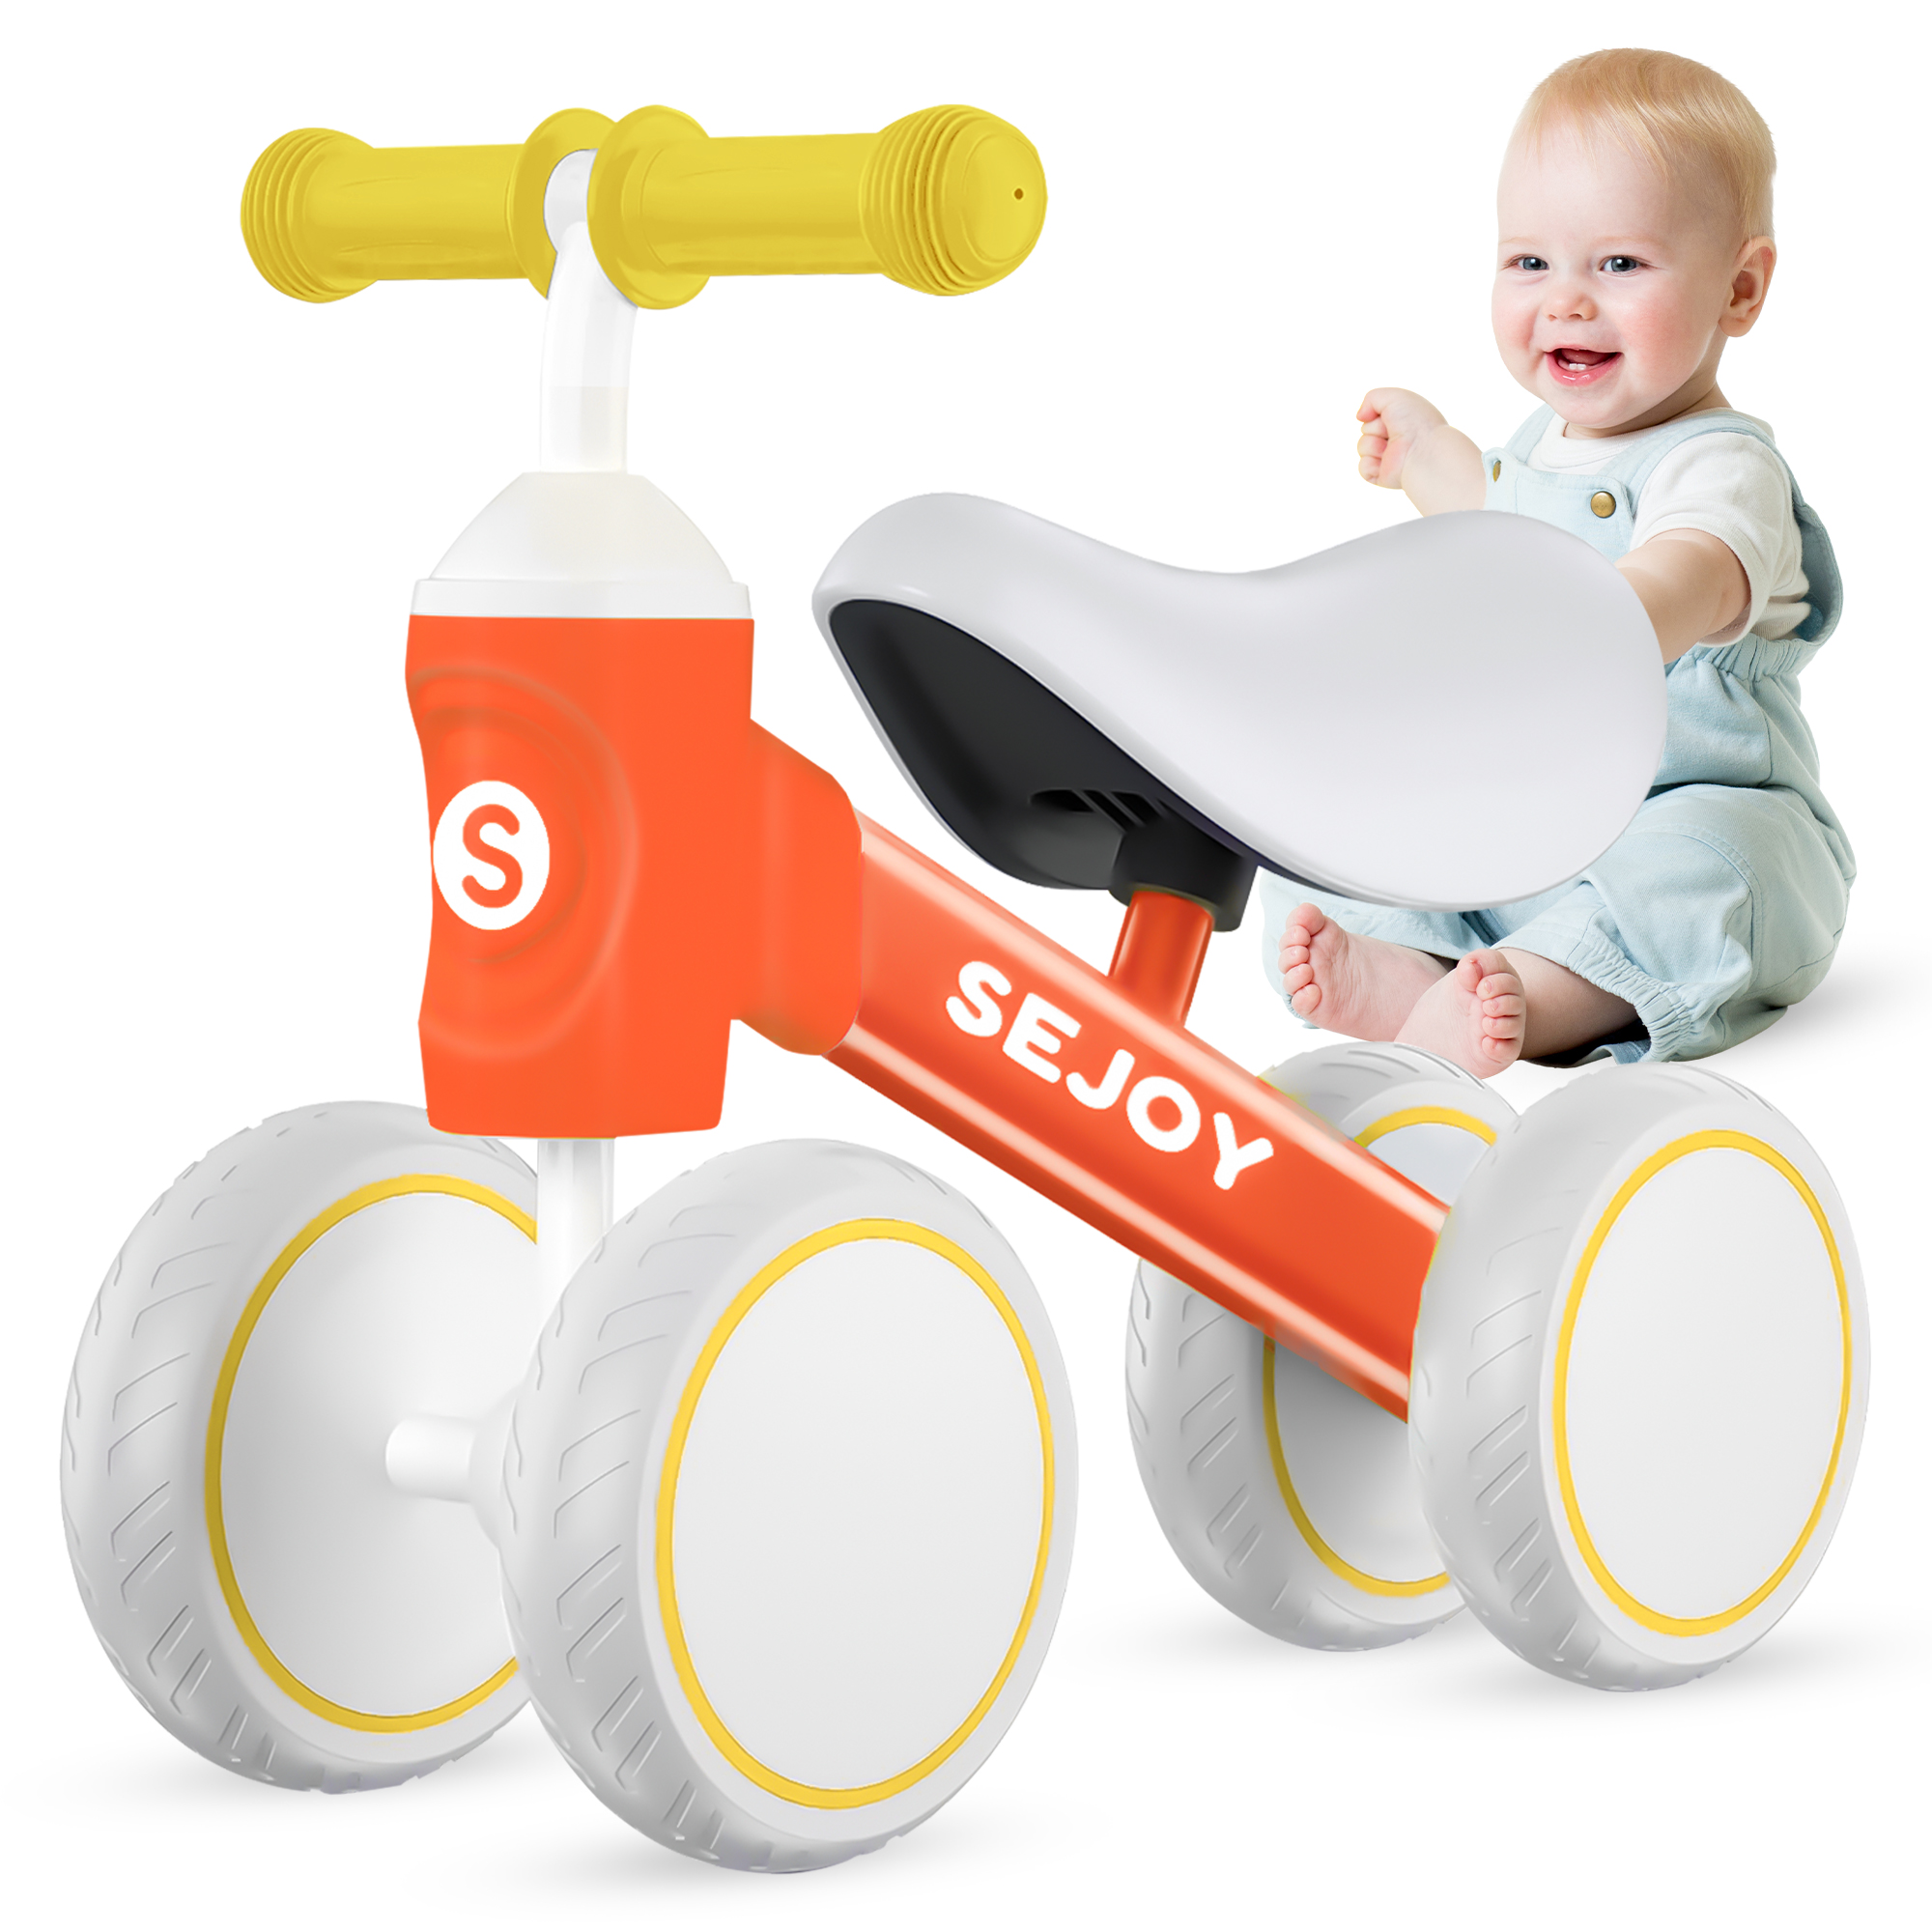 Sejoy Baby Balance Bike, 10-36 Month Kids Toddler Walker, 4 Wheels Riding Toys for Boys and Girls, First Birthday Gifts - image 1 of 7